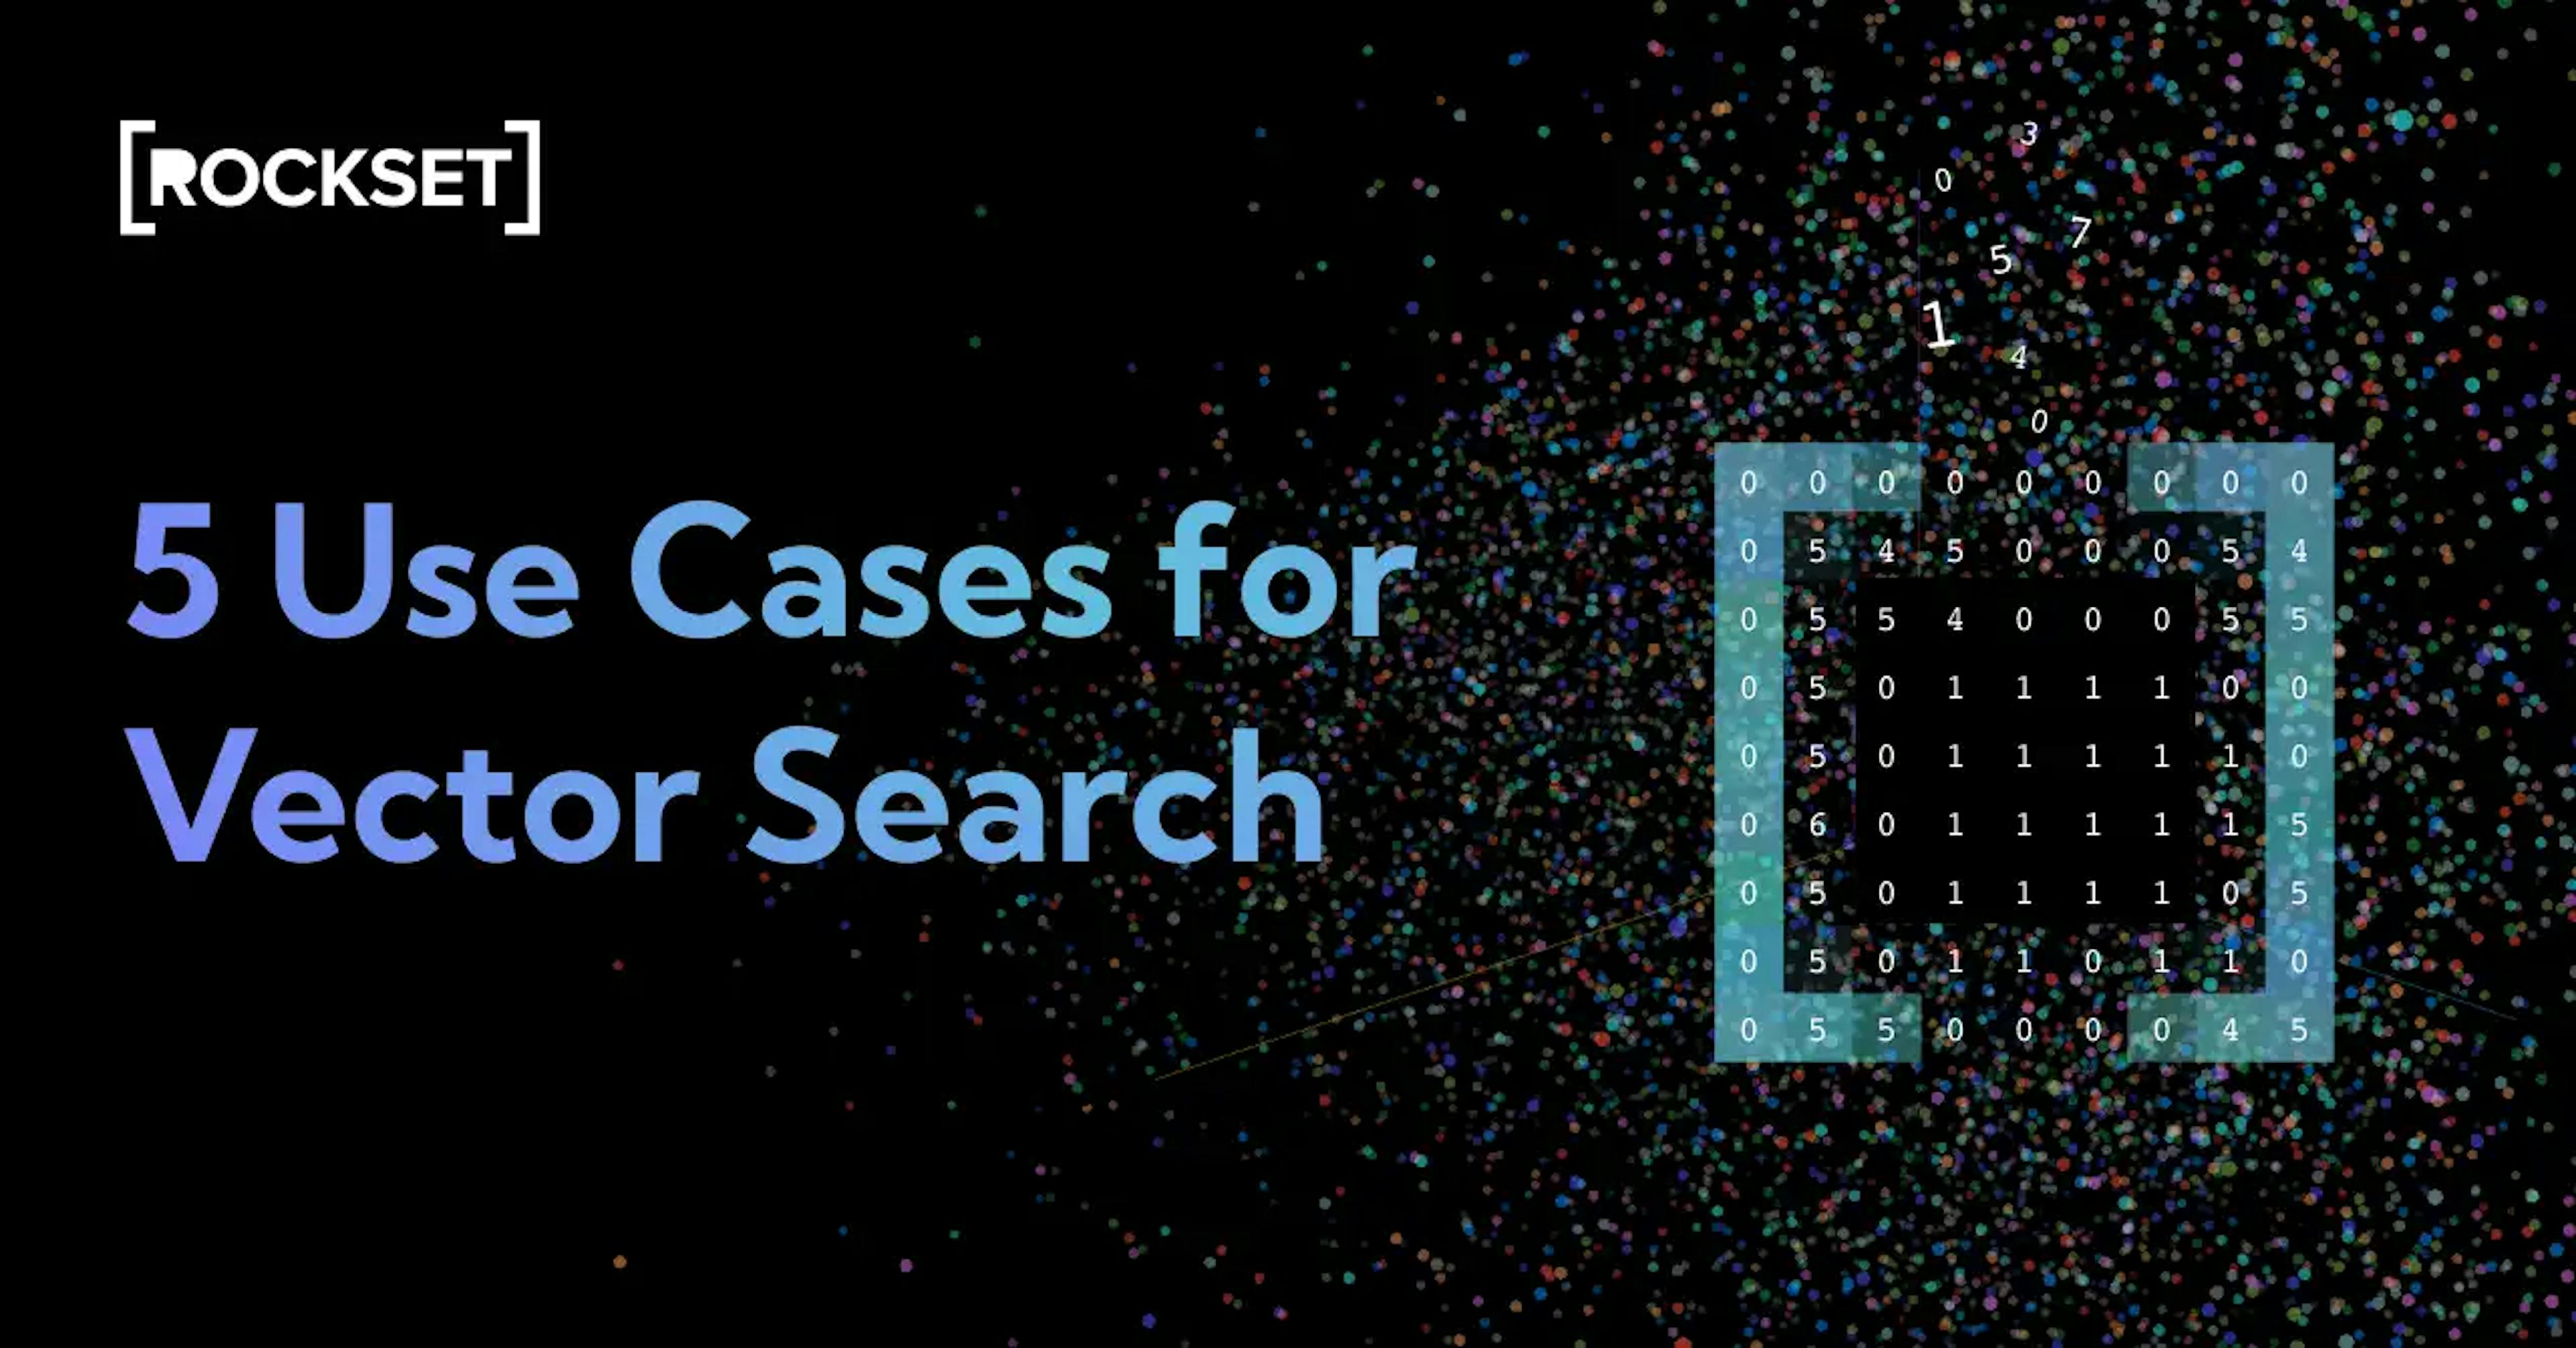 featured image - A Look Into 5 Use Cases for Vector Search from Major Tech Companies